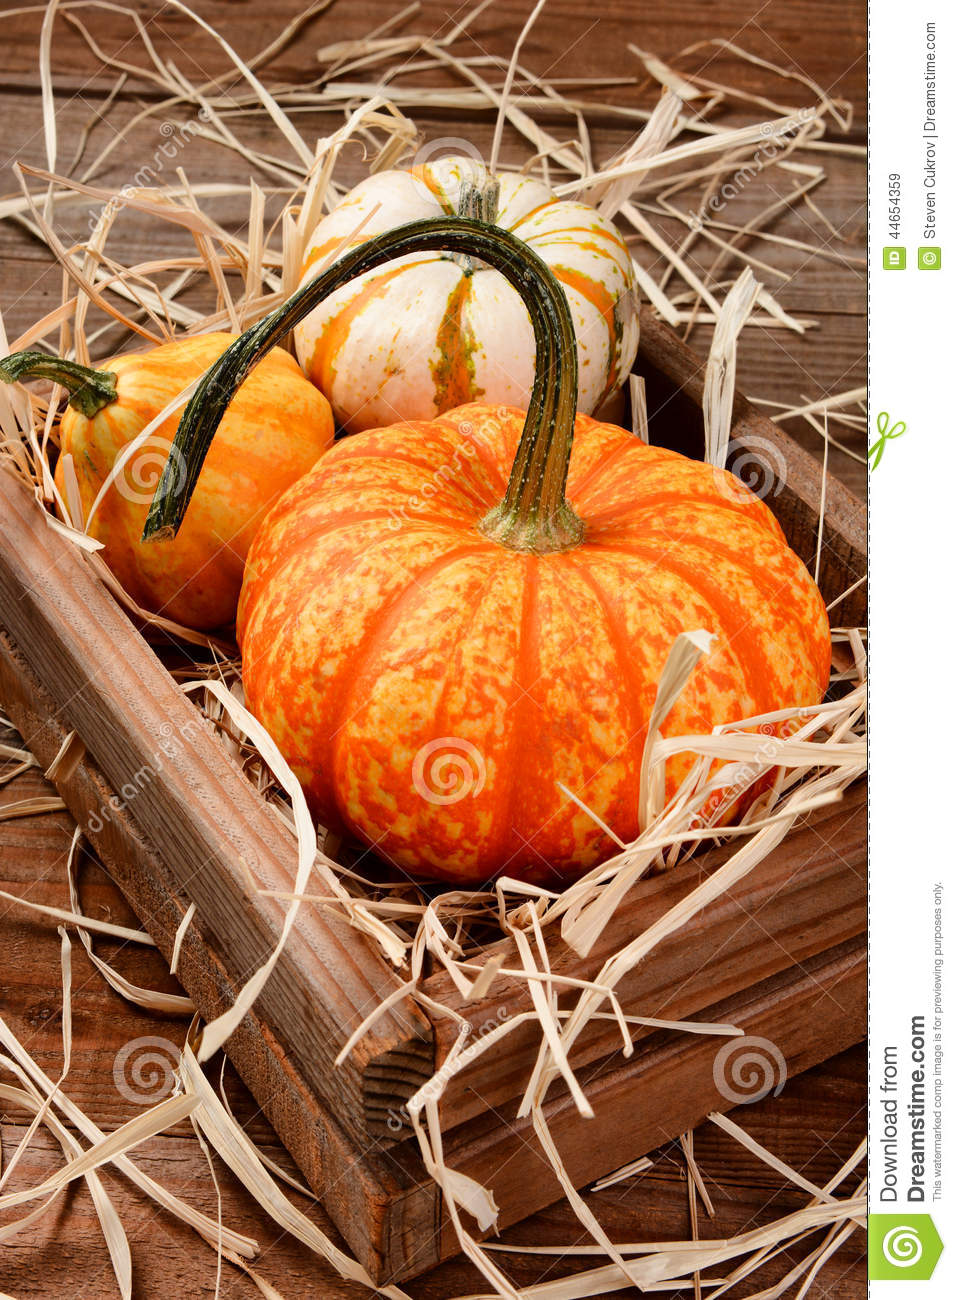 Decorative Pumpkins And Gourds Stock Photo   Image  44654359